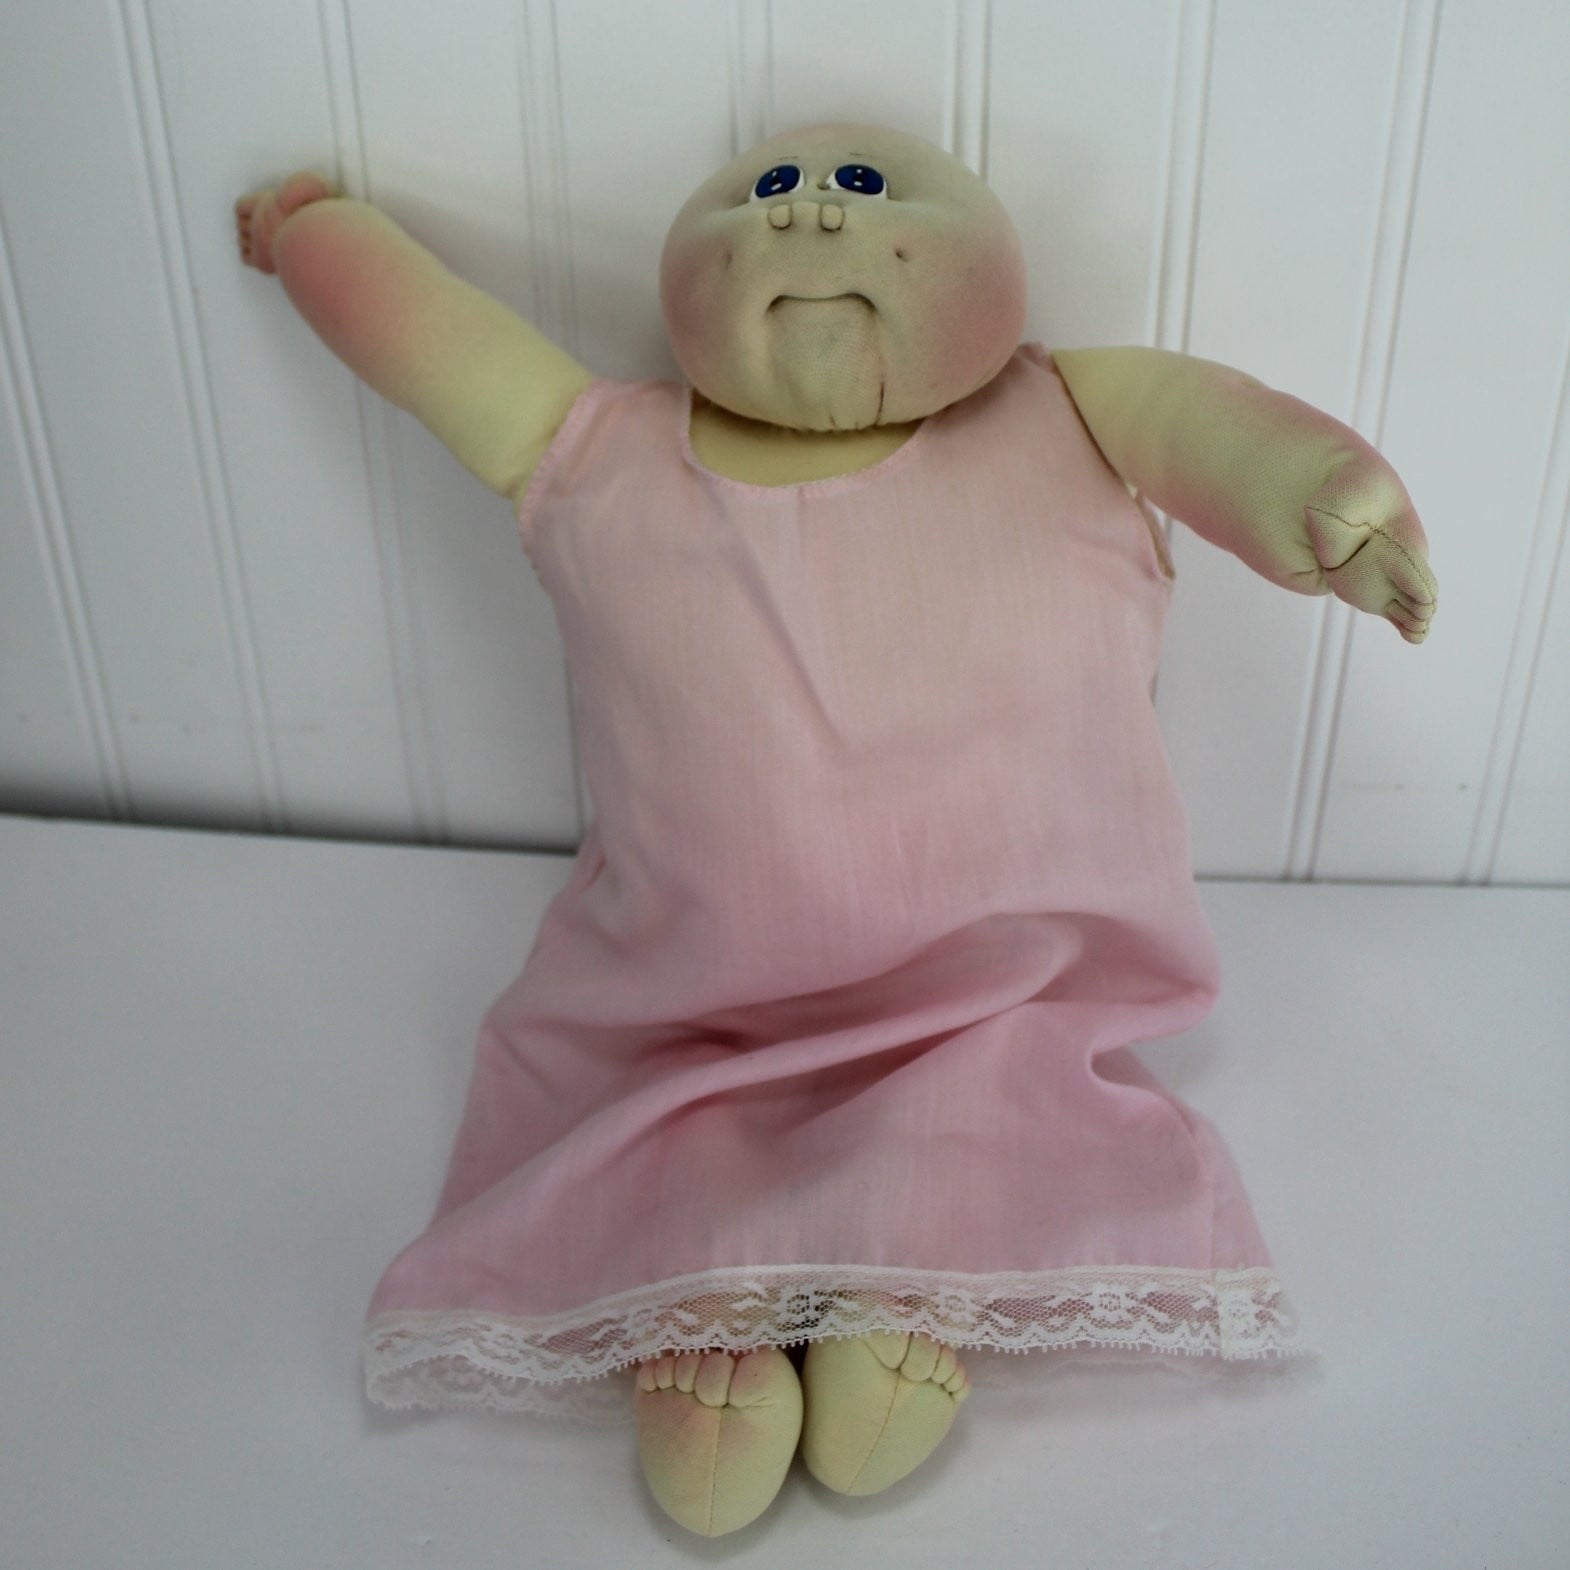 Cabbage Patch Little People Preemie II Doll Birth Dec. 27 1982 Birth Certif & Name Change Papers petticoat gown